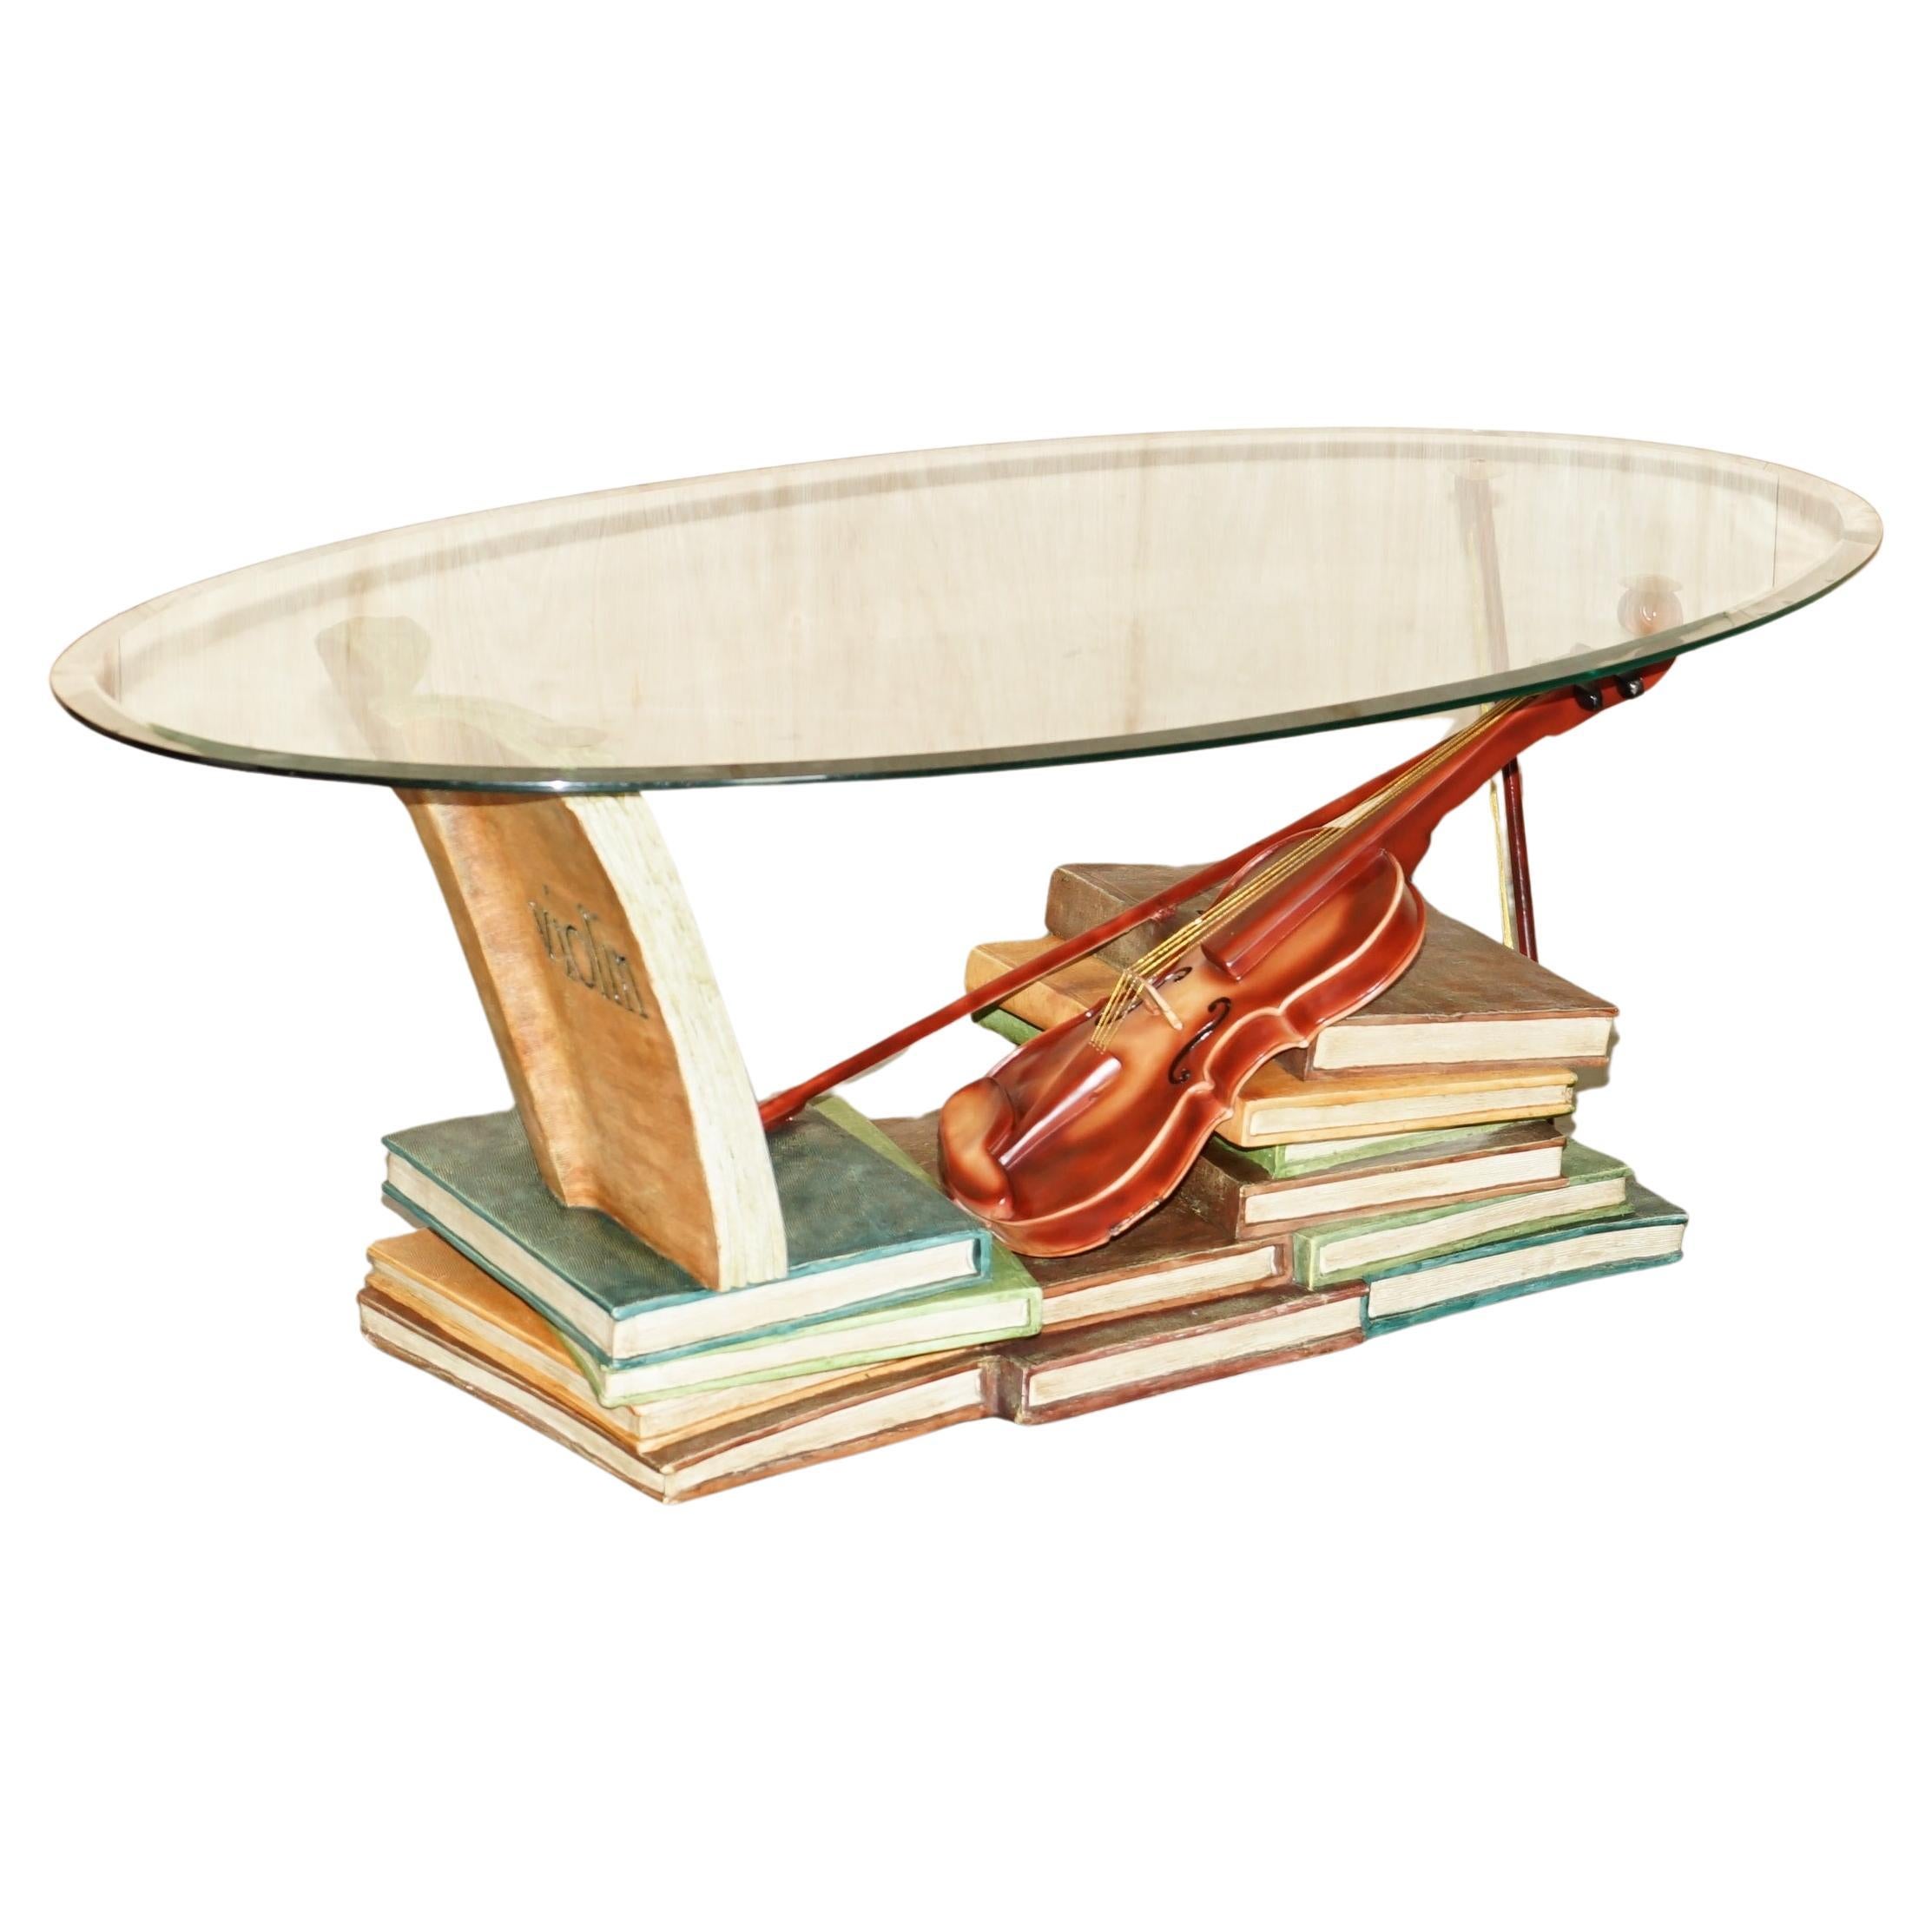 SUPER DECORATIVE MOZART STACKED BOOKS & VIOLIN COFFEE TABLE WiTH GLASS OVAL TOP